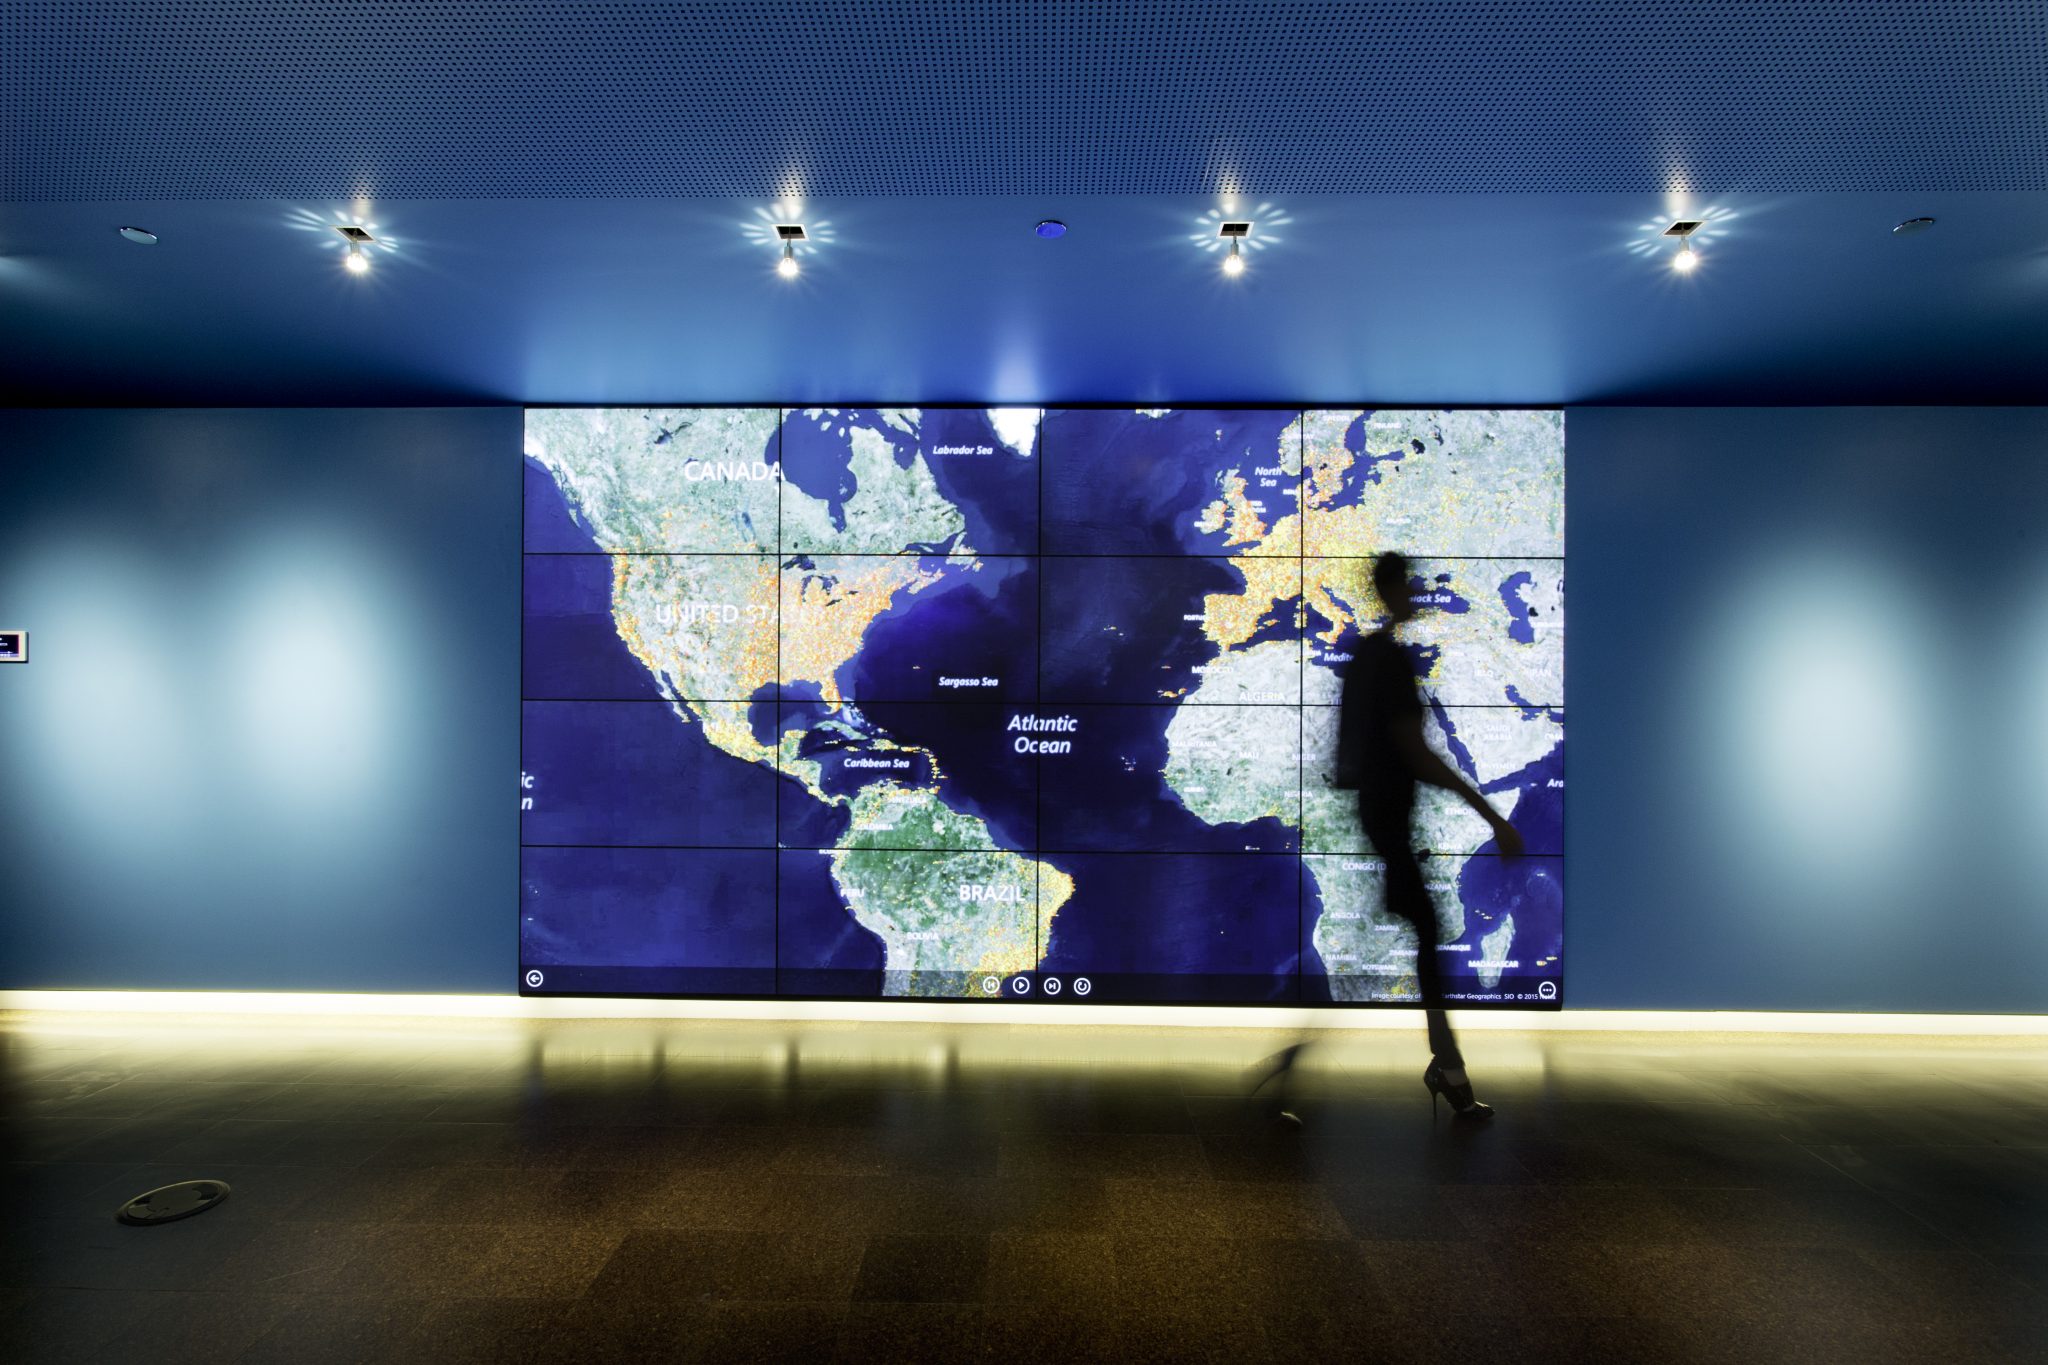 Photo of an interactive LED wall showing a map of the world, with a man walking in the foreground in front of it